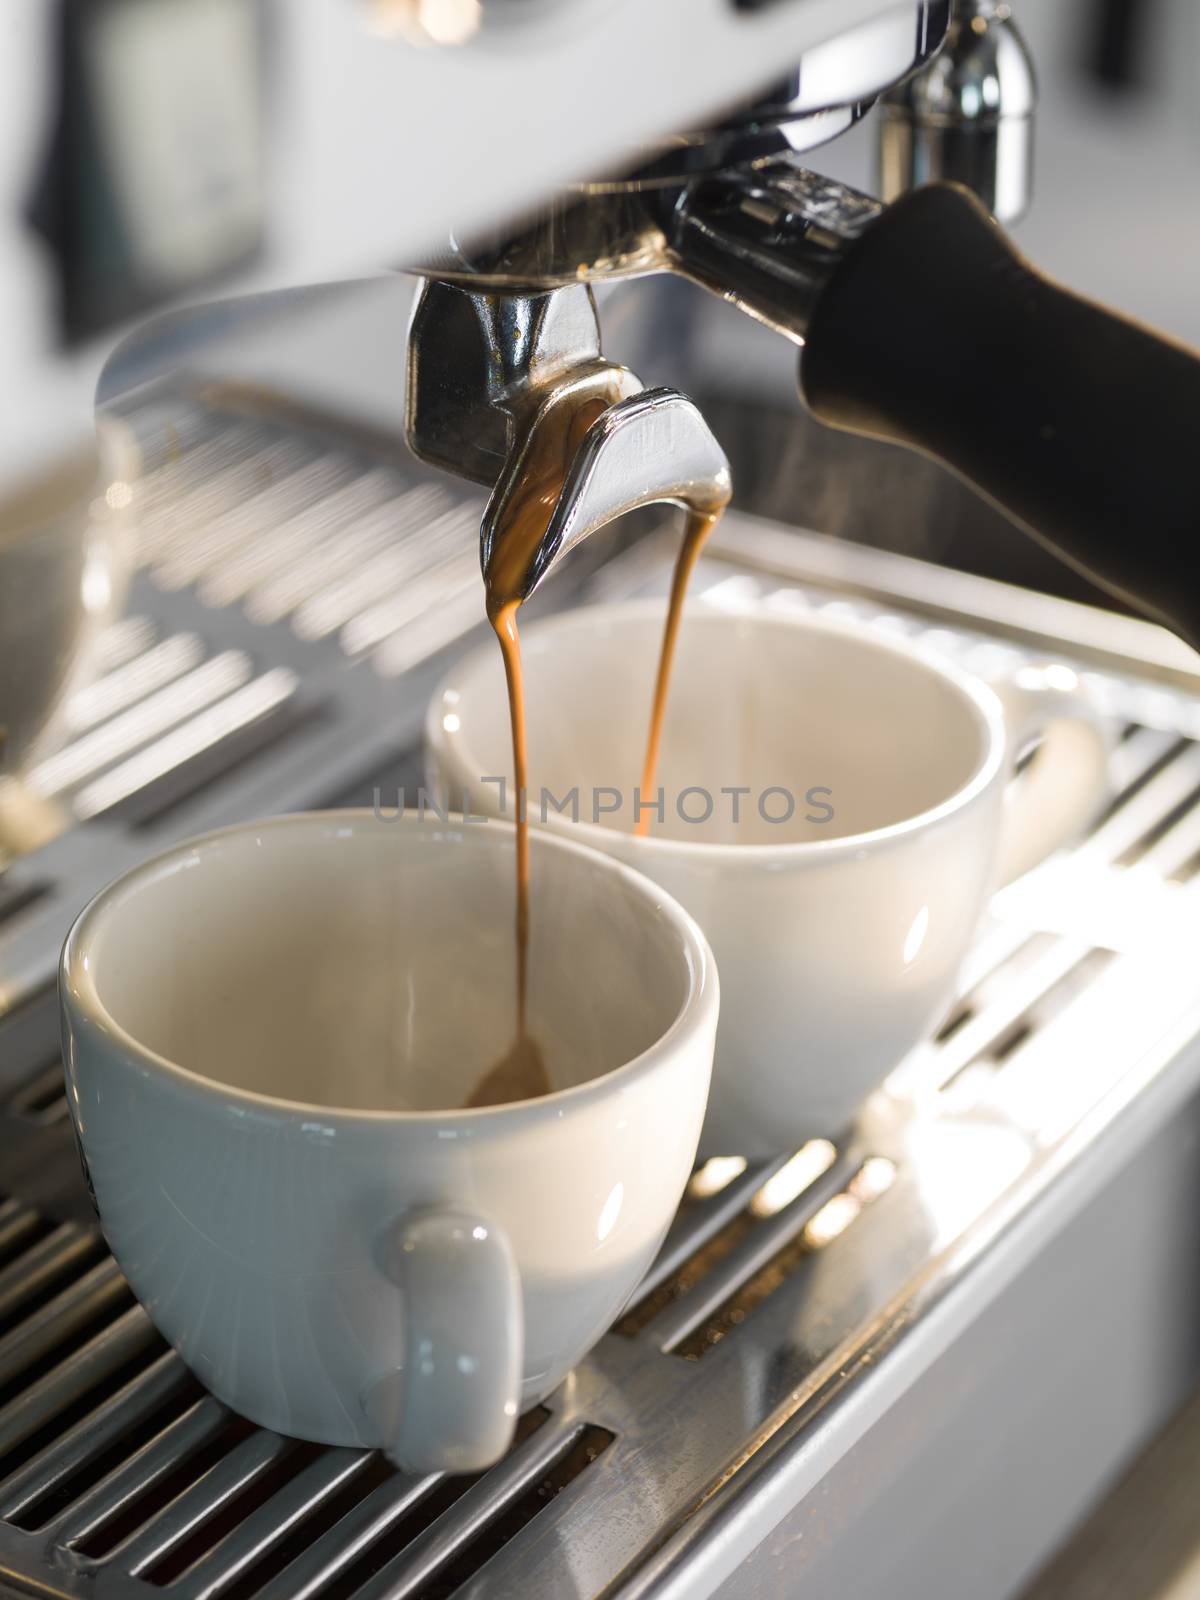 Espresso being made with a professional coffee machine.